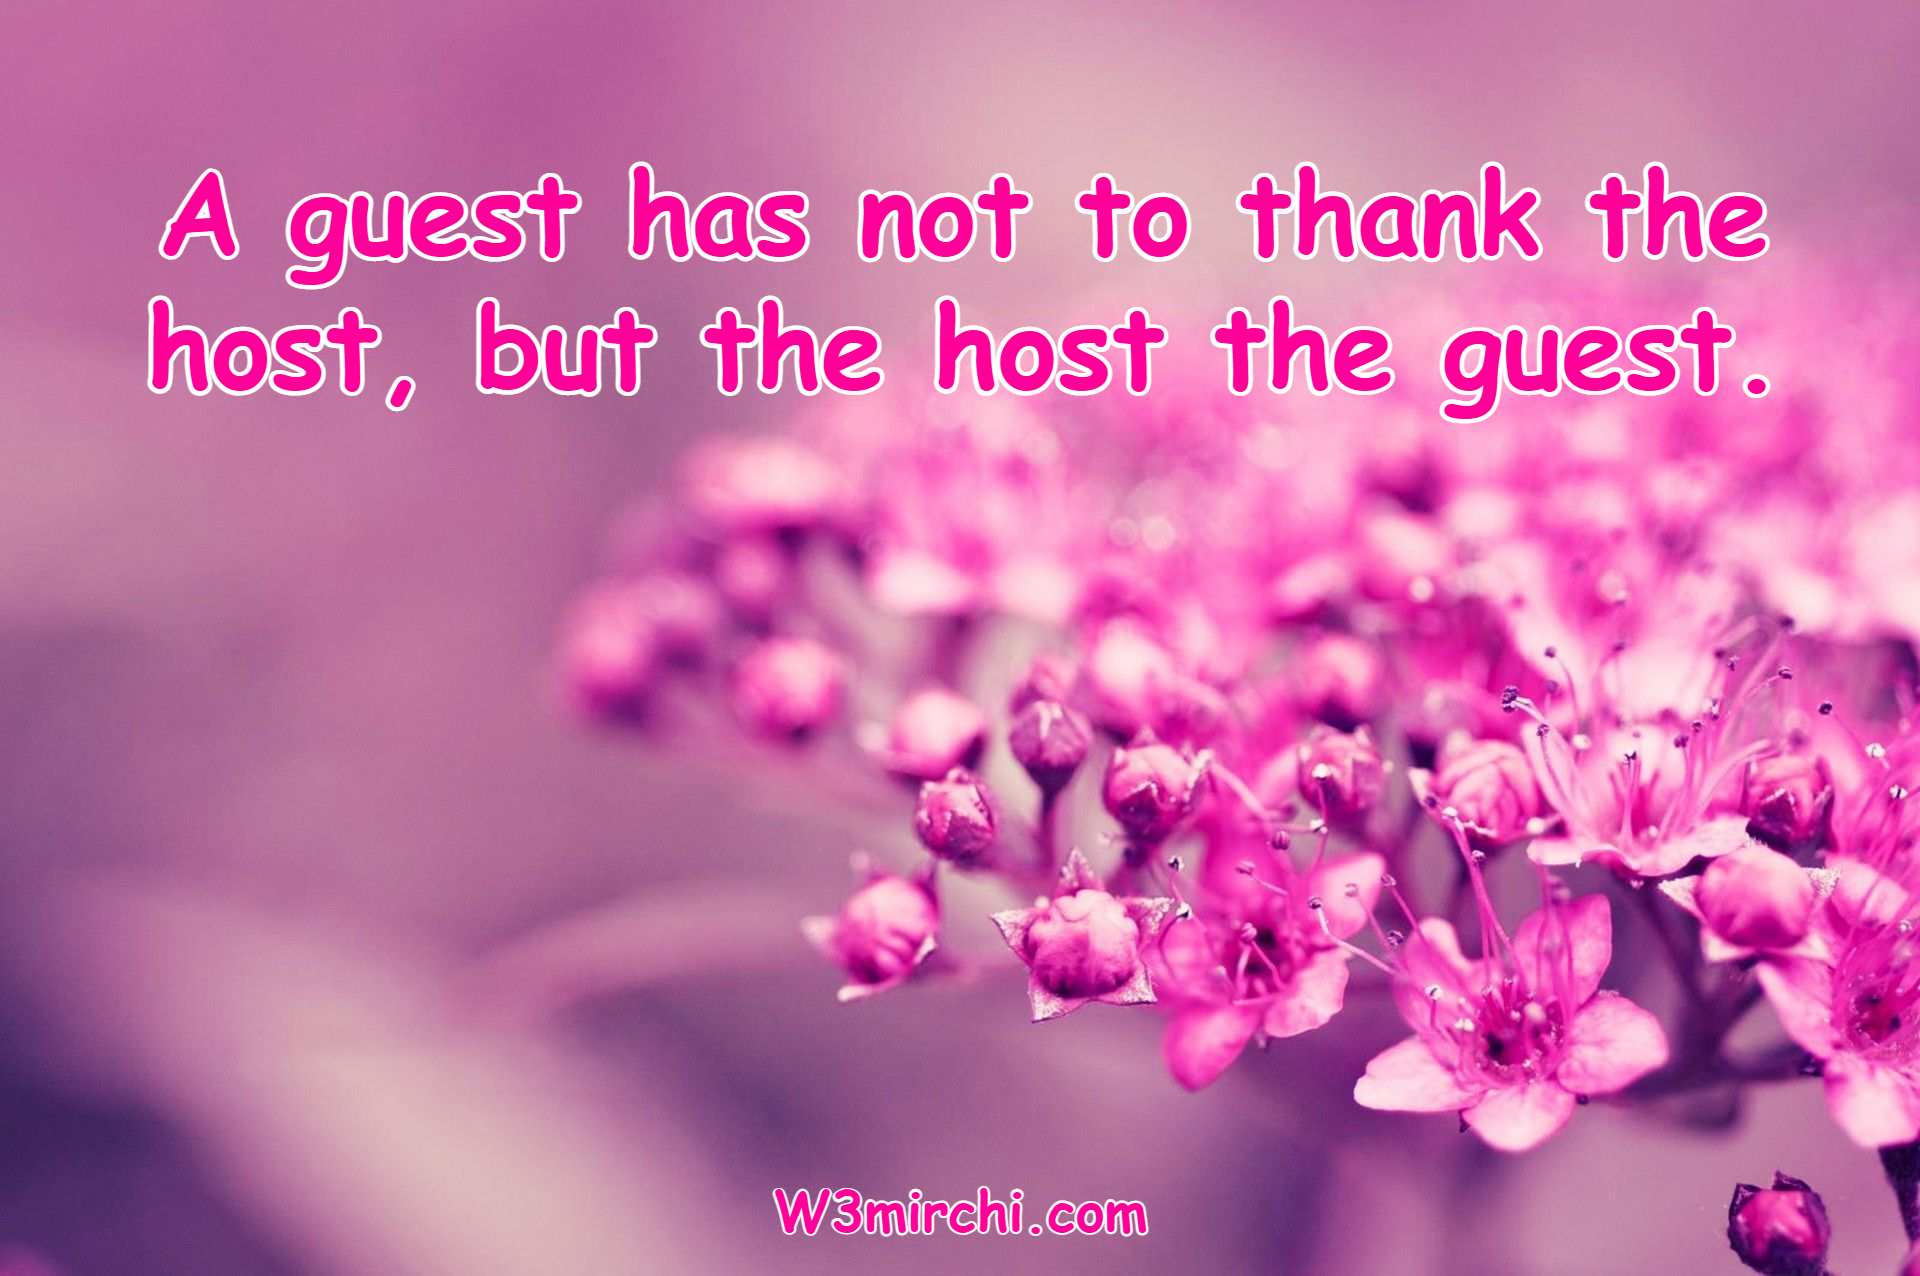 A guest has not to thank the